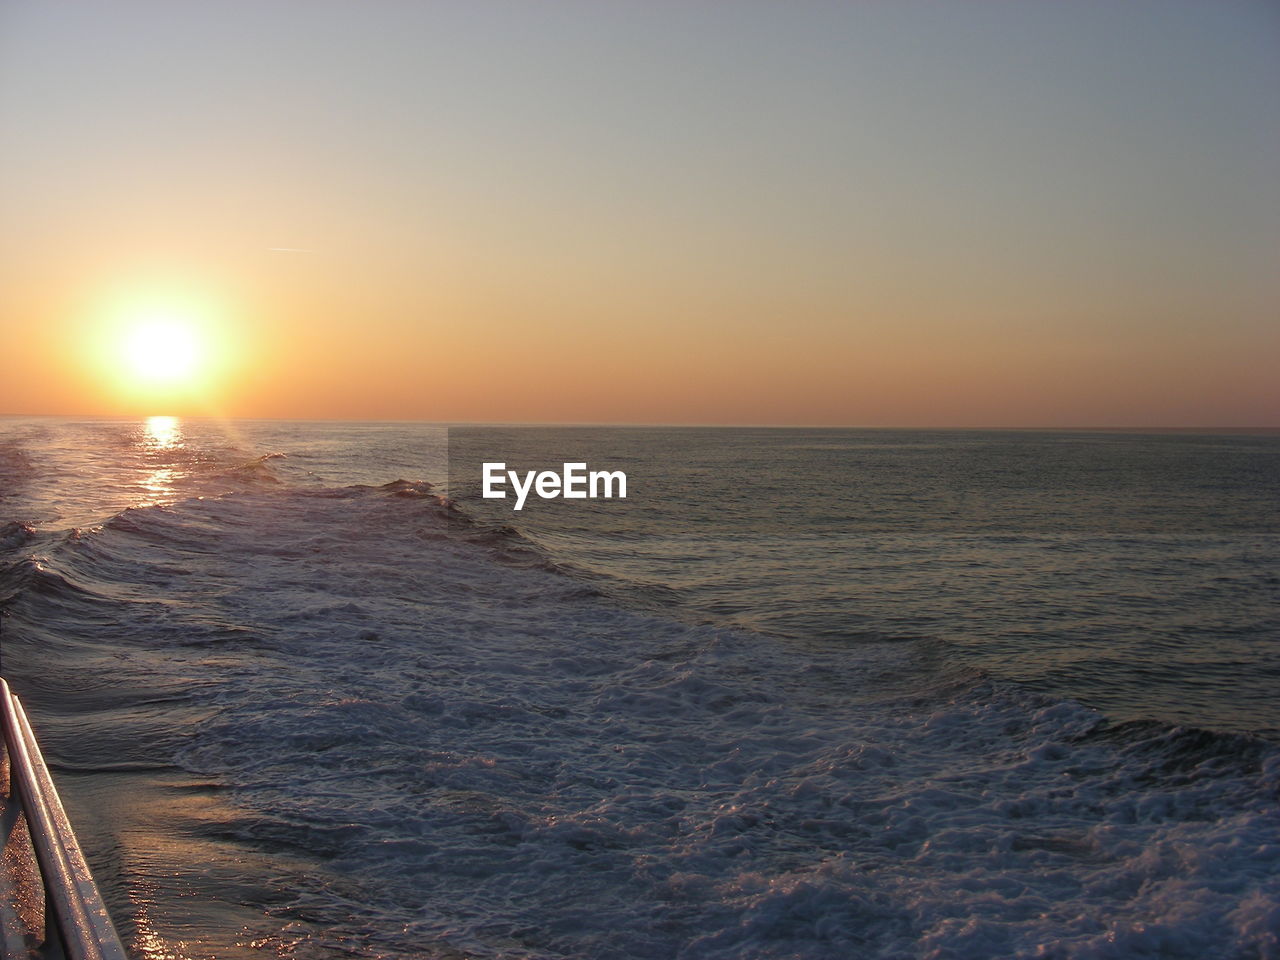 SCENIC VIEW OF SEA AGAINST CLEAR SKY AT SUNSET